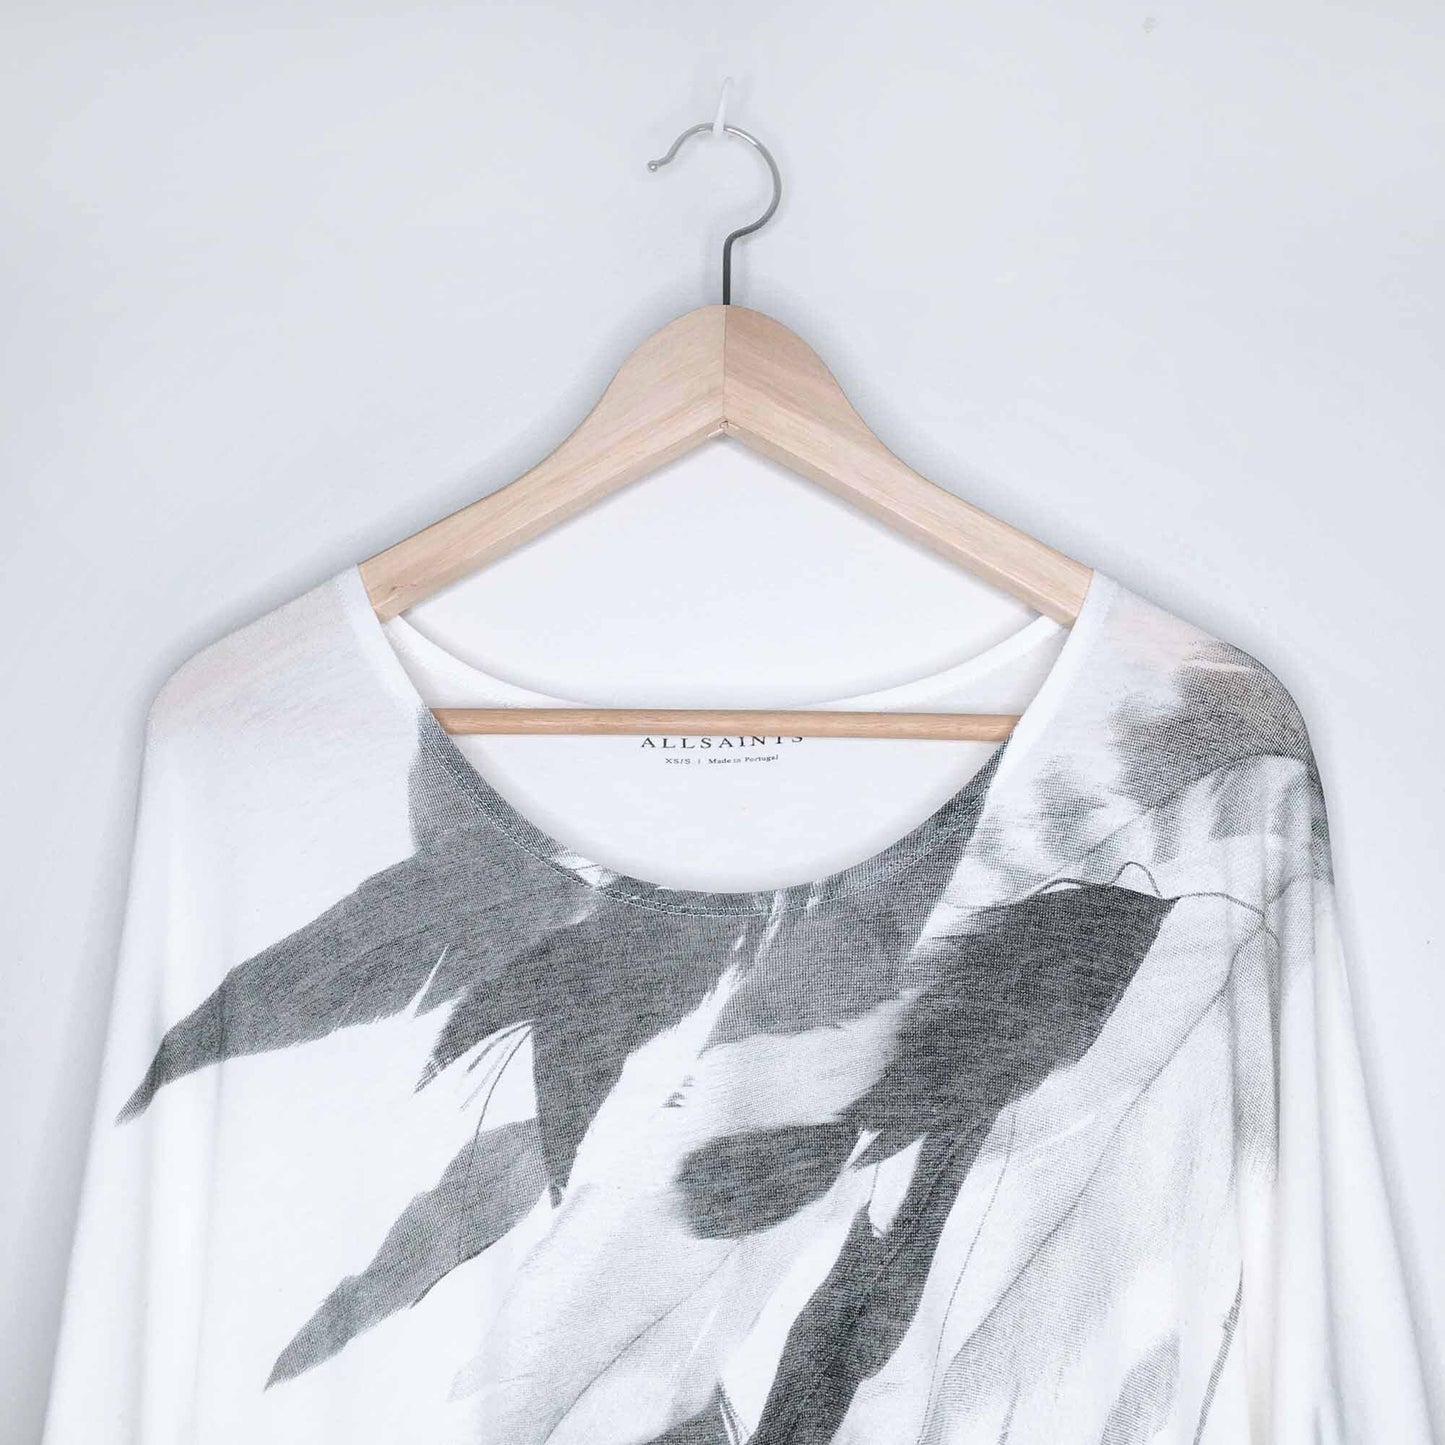 All Saints oversized feather dreams t-shirt - size xs/sm